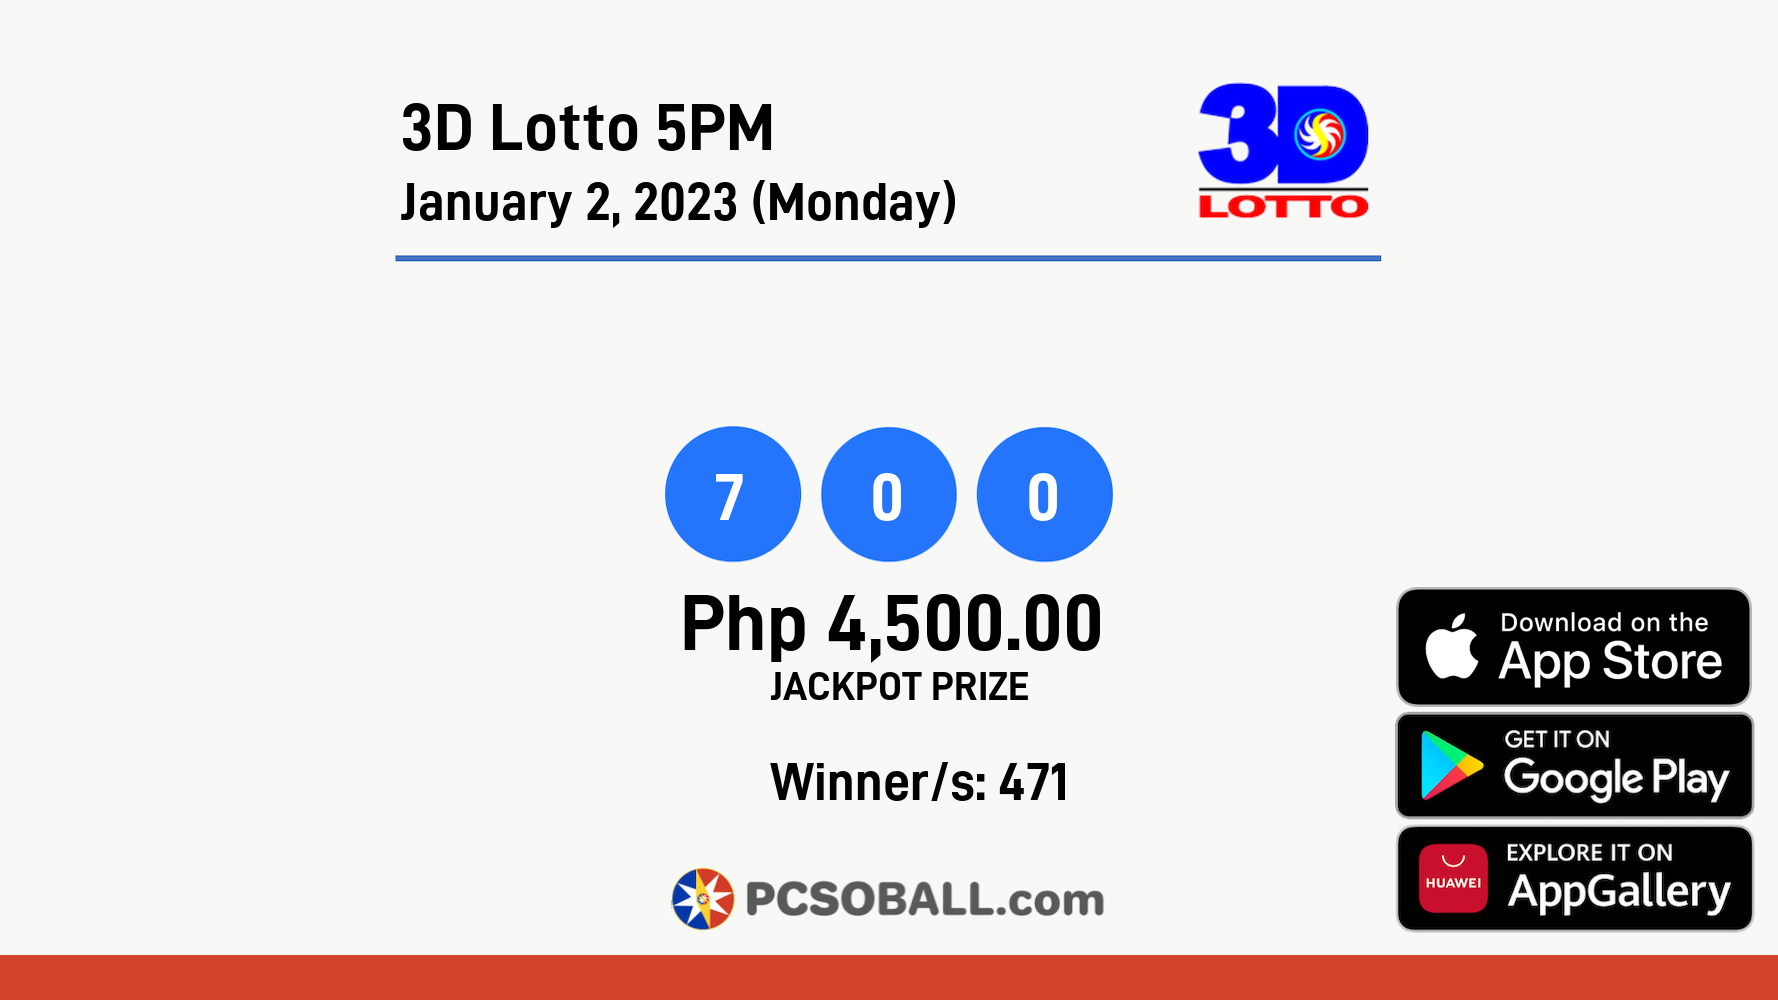 3D Lotto 5PM January 2, 2023 (Monday) Result